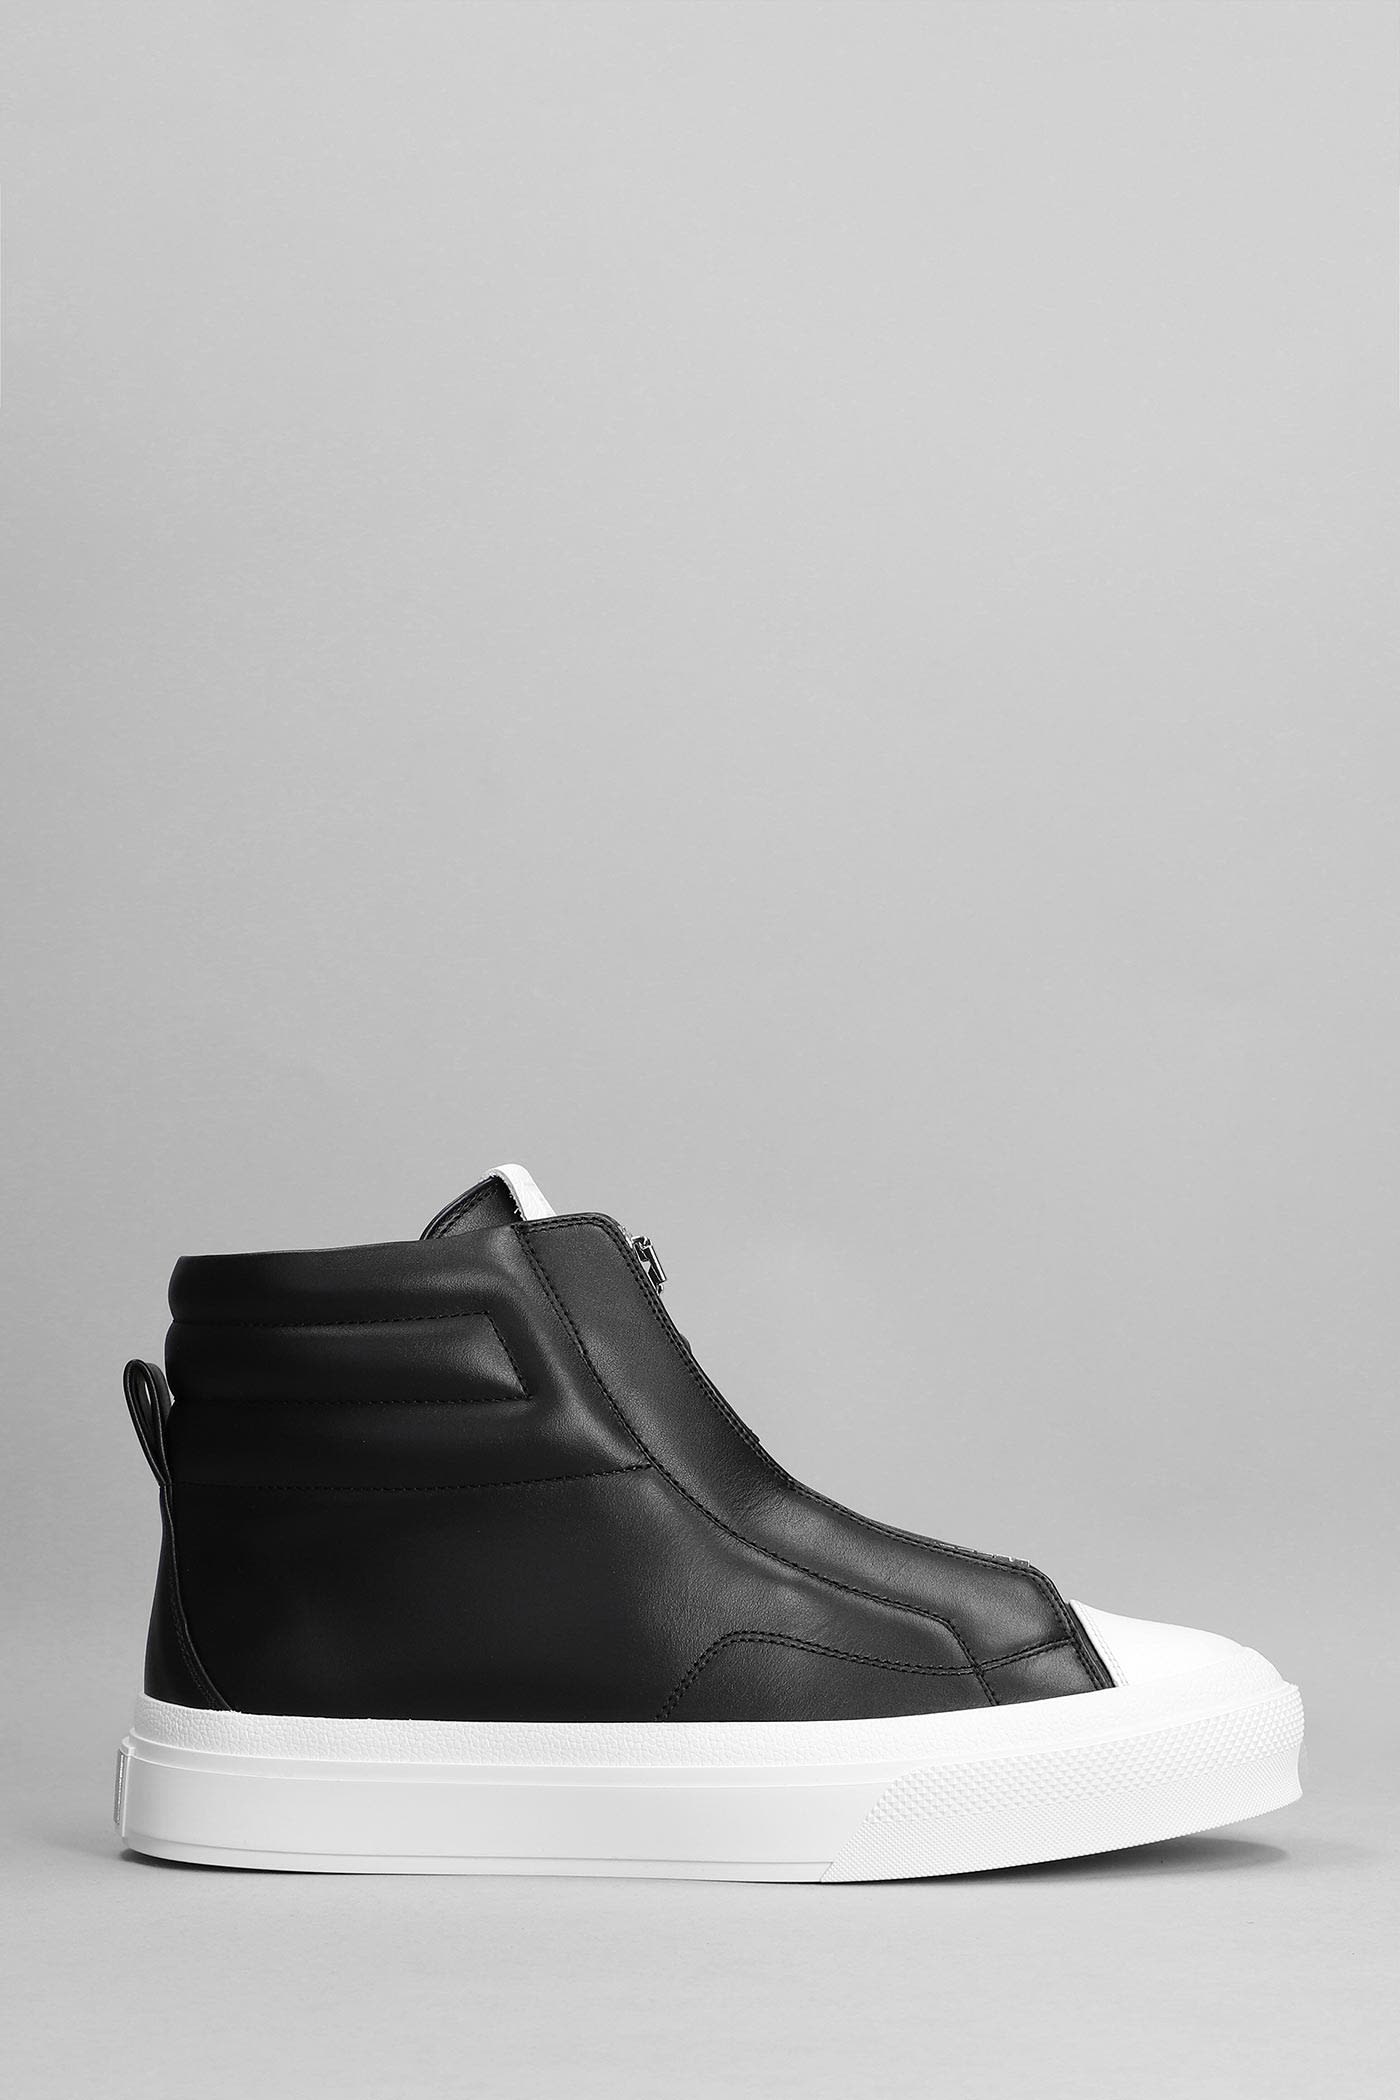 Givenchy City High Top Sneakers In Black Leather